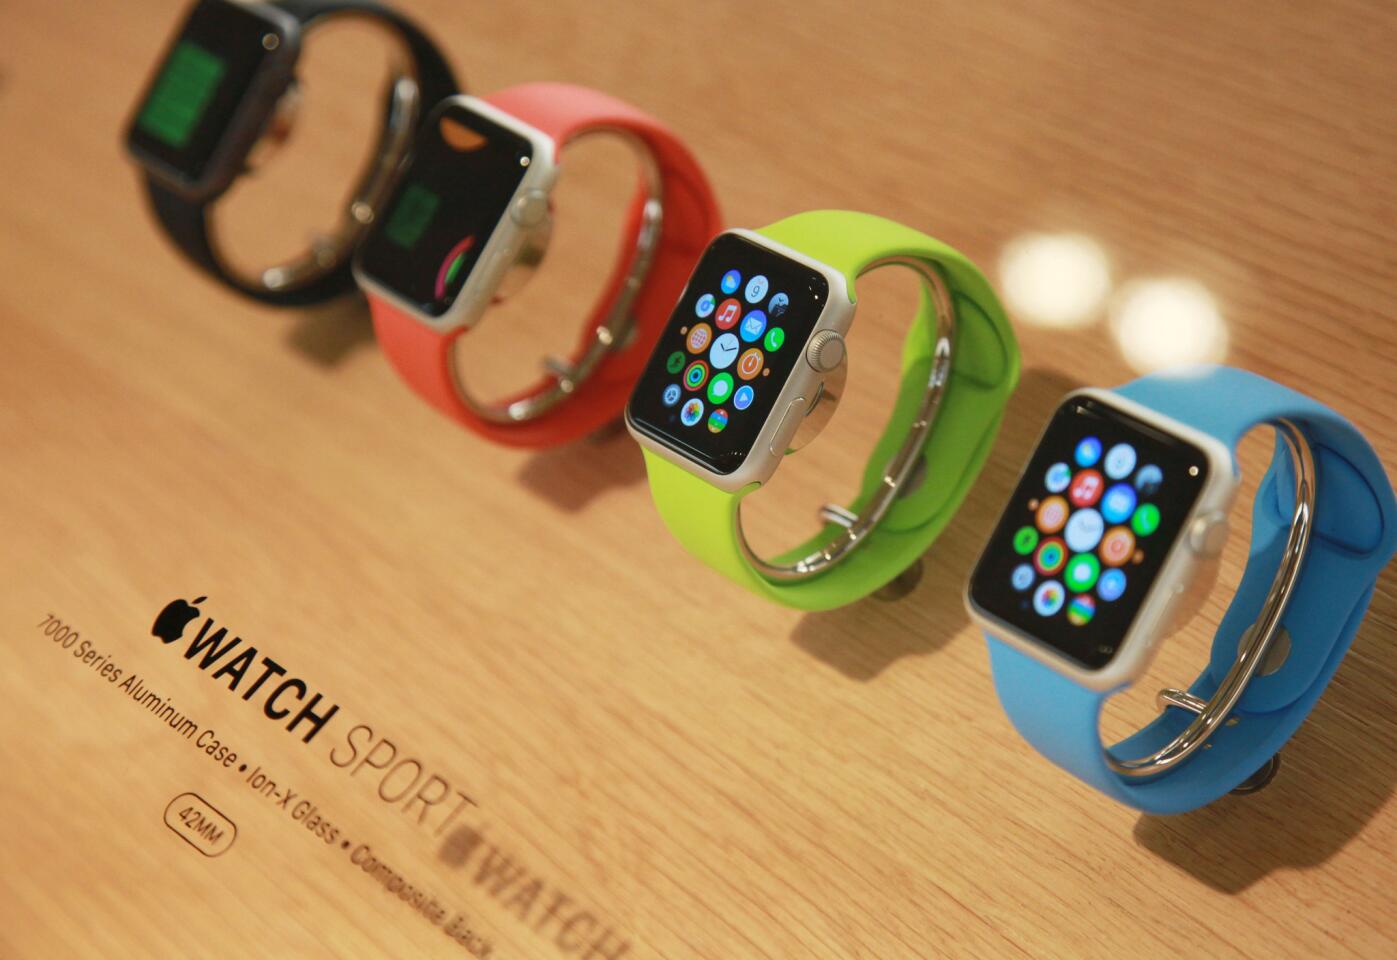 Apple watch debuted to mixed reviews